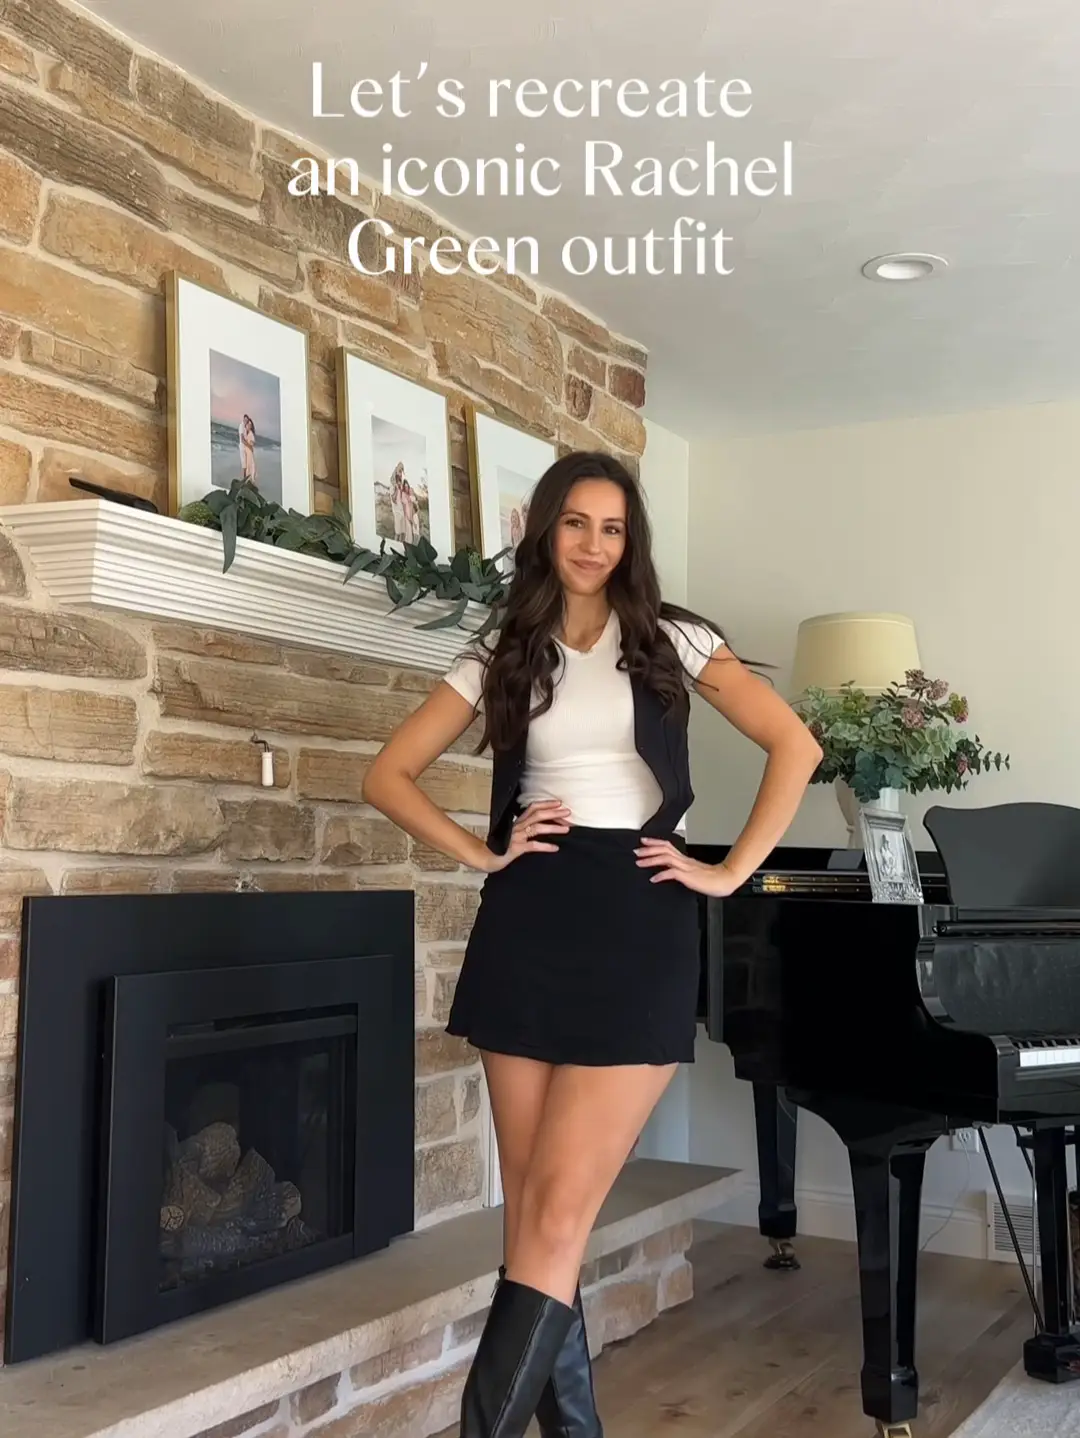 Rachel Green outfit🖤, Video published by Kathleen